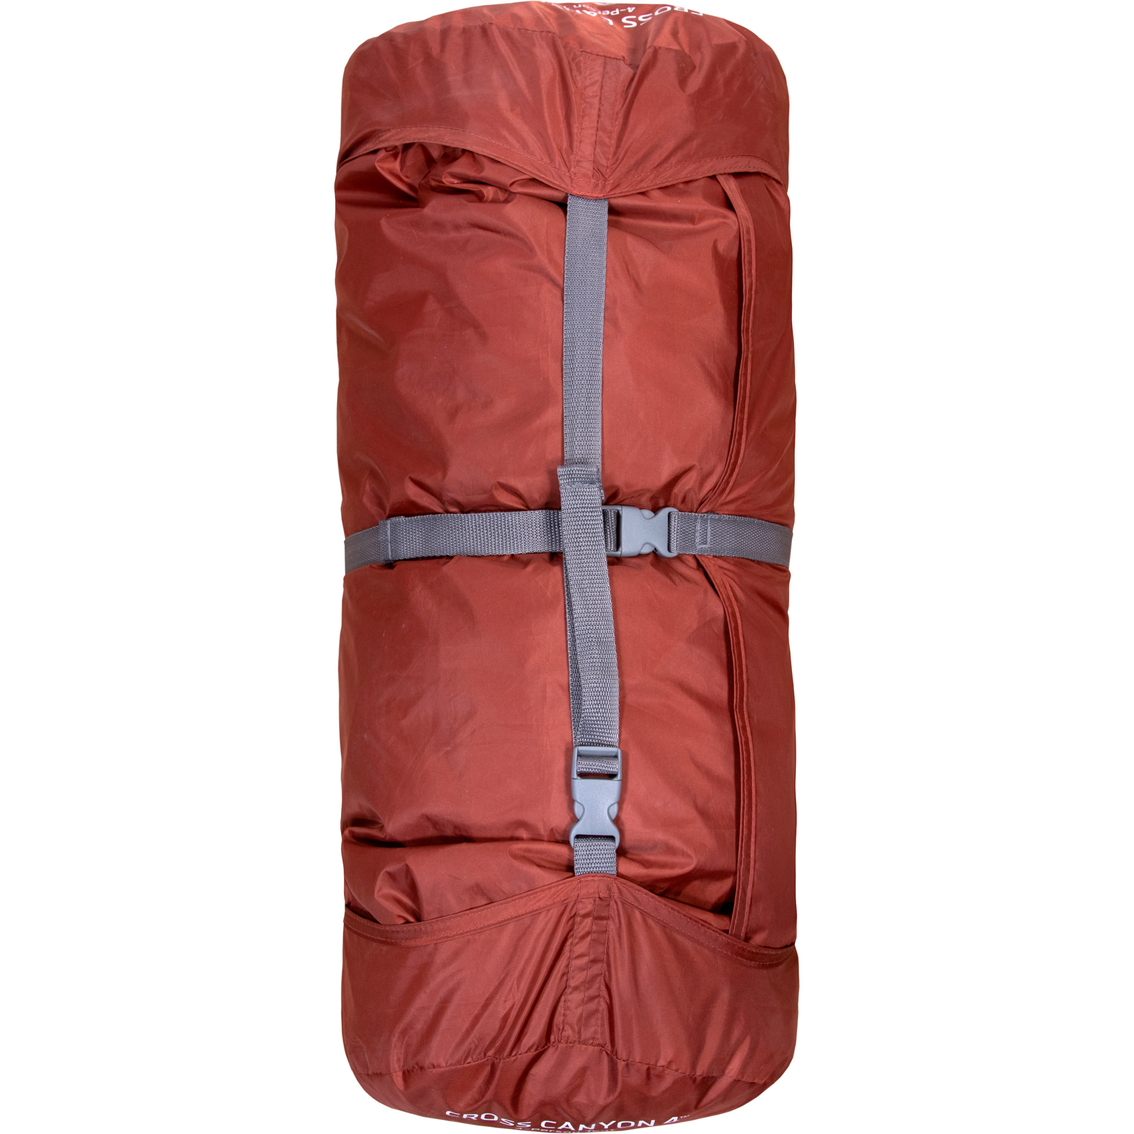 Klymit Cross Canyon 2 Tent - Image 4 of 10